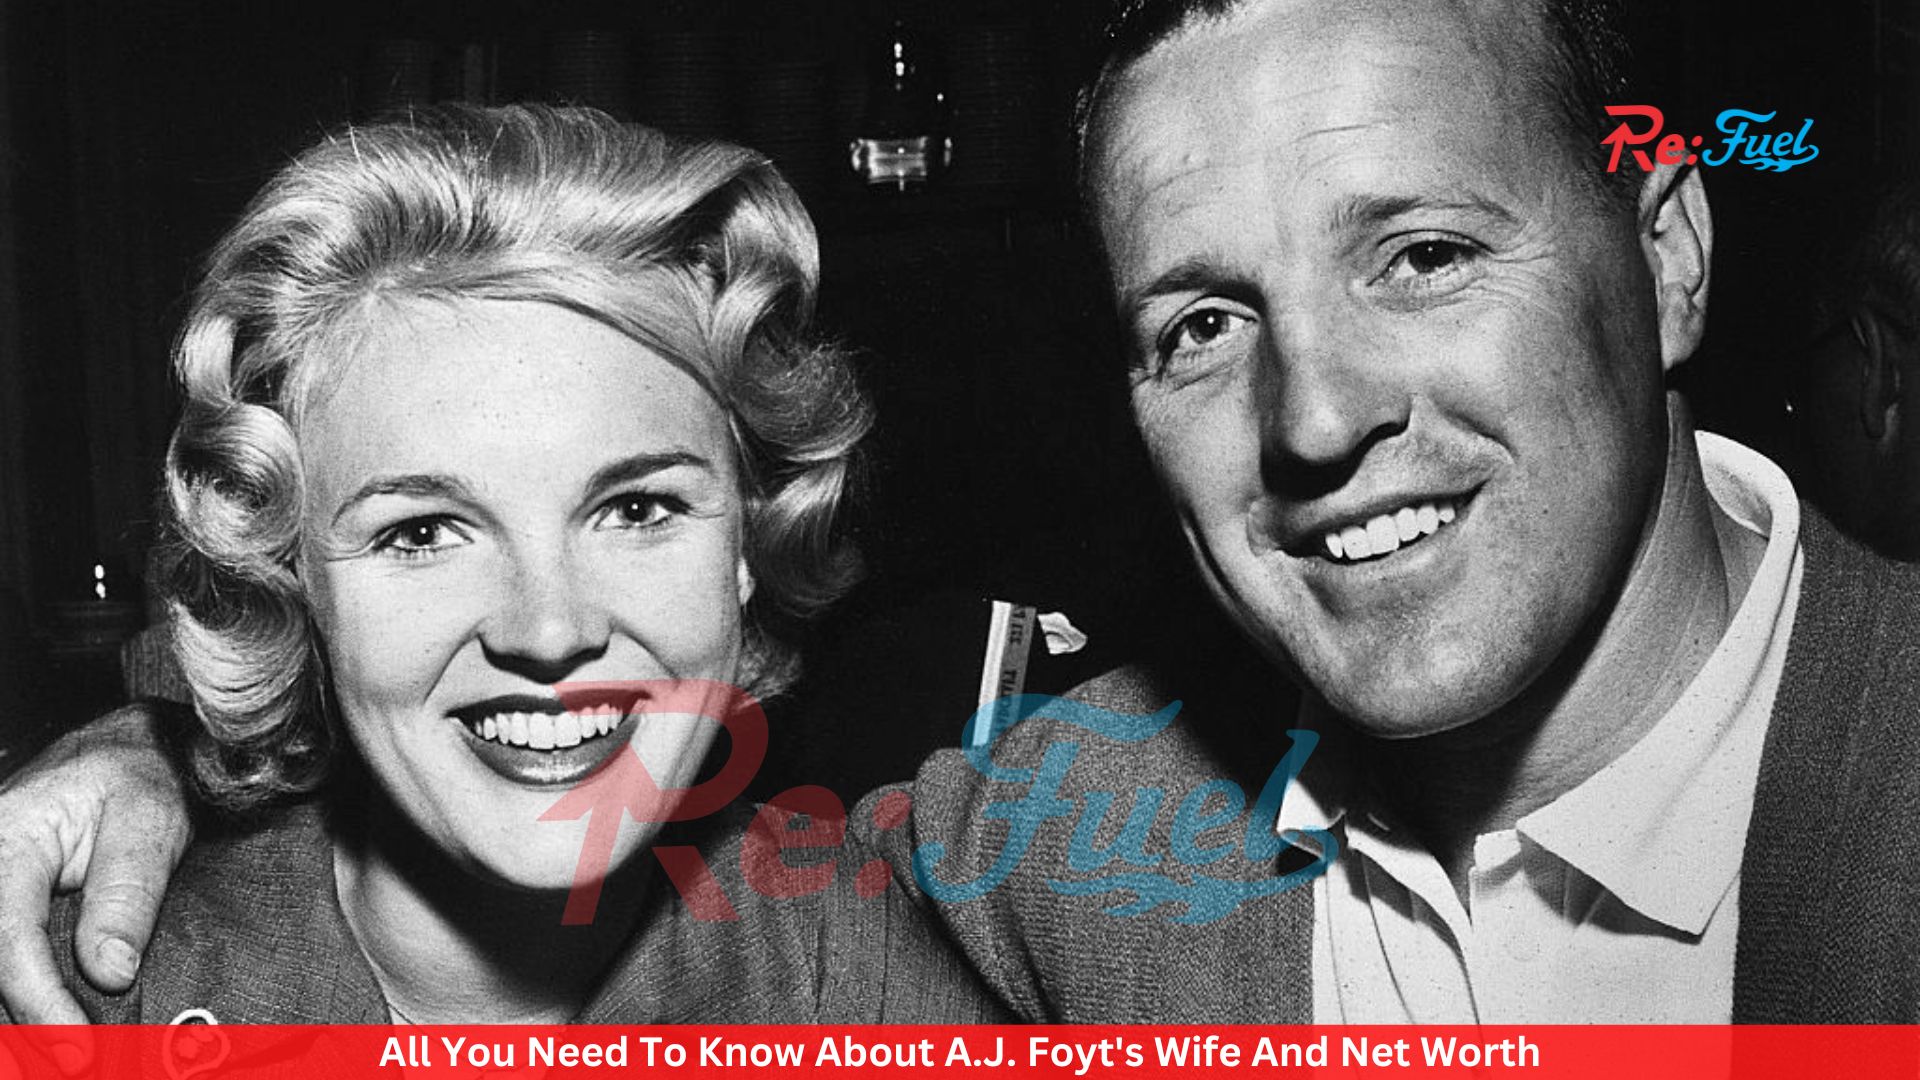 All You Need To Know About A.J. Foyt's Wife And Net Worth